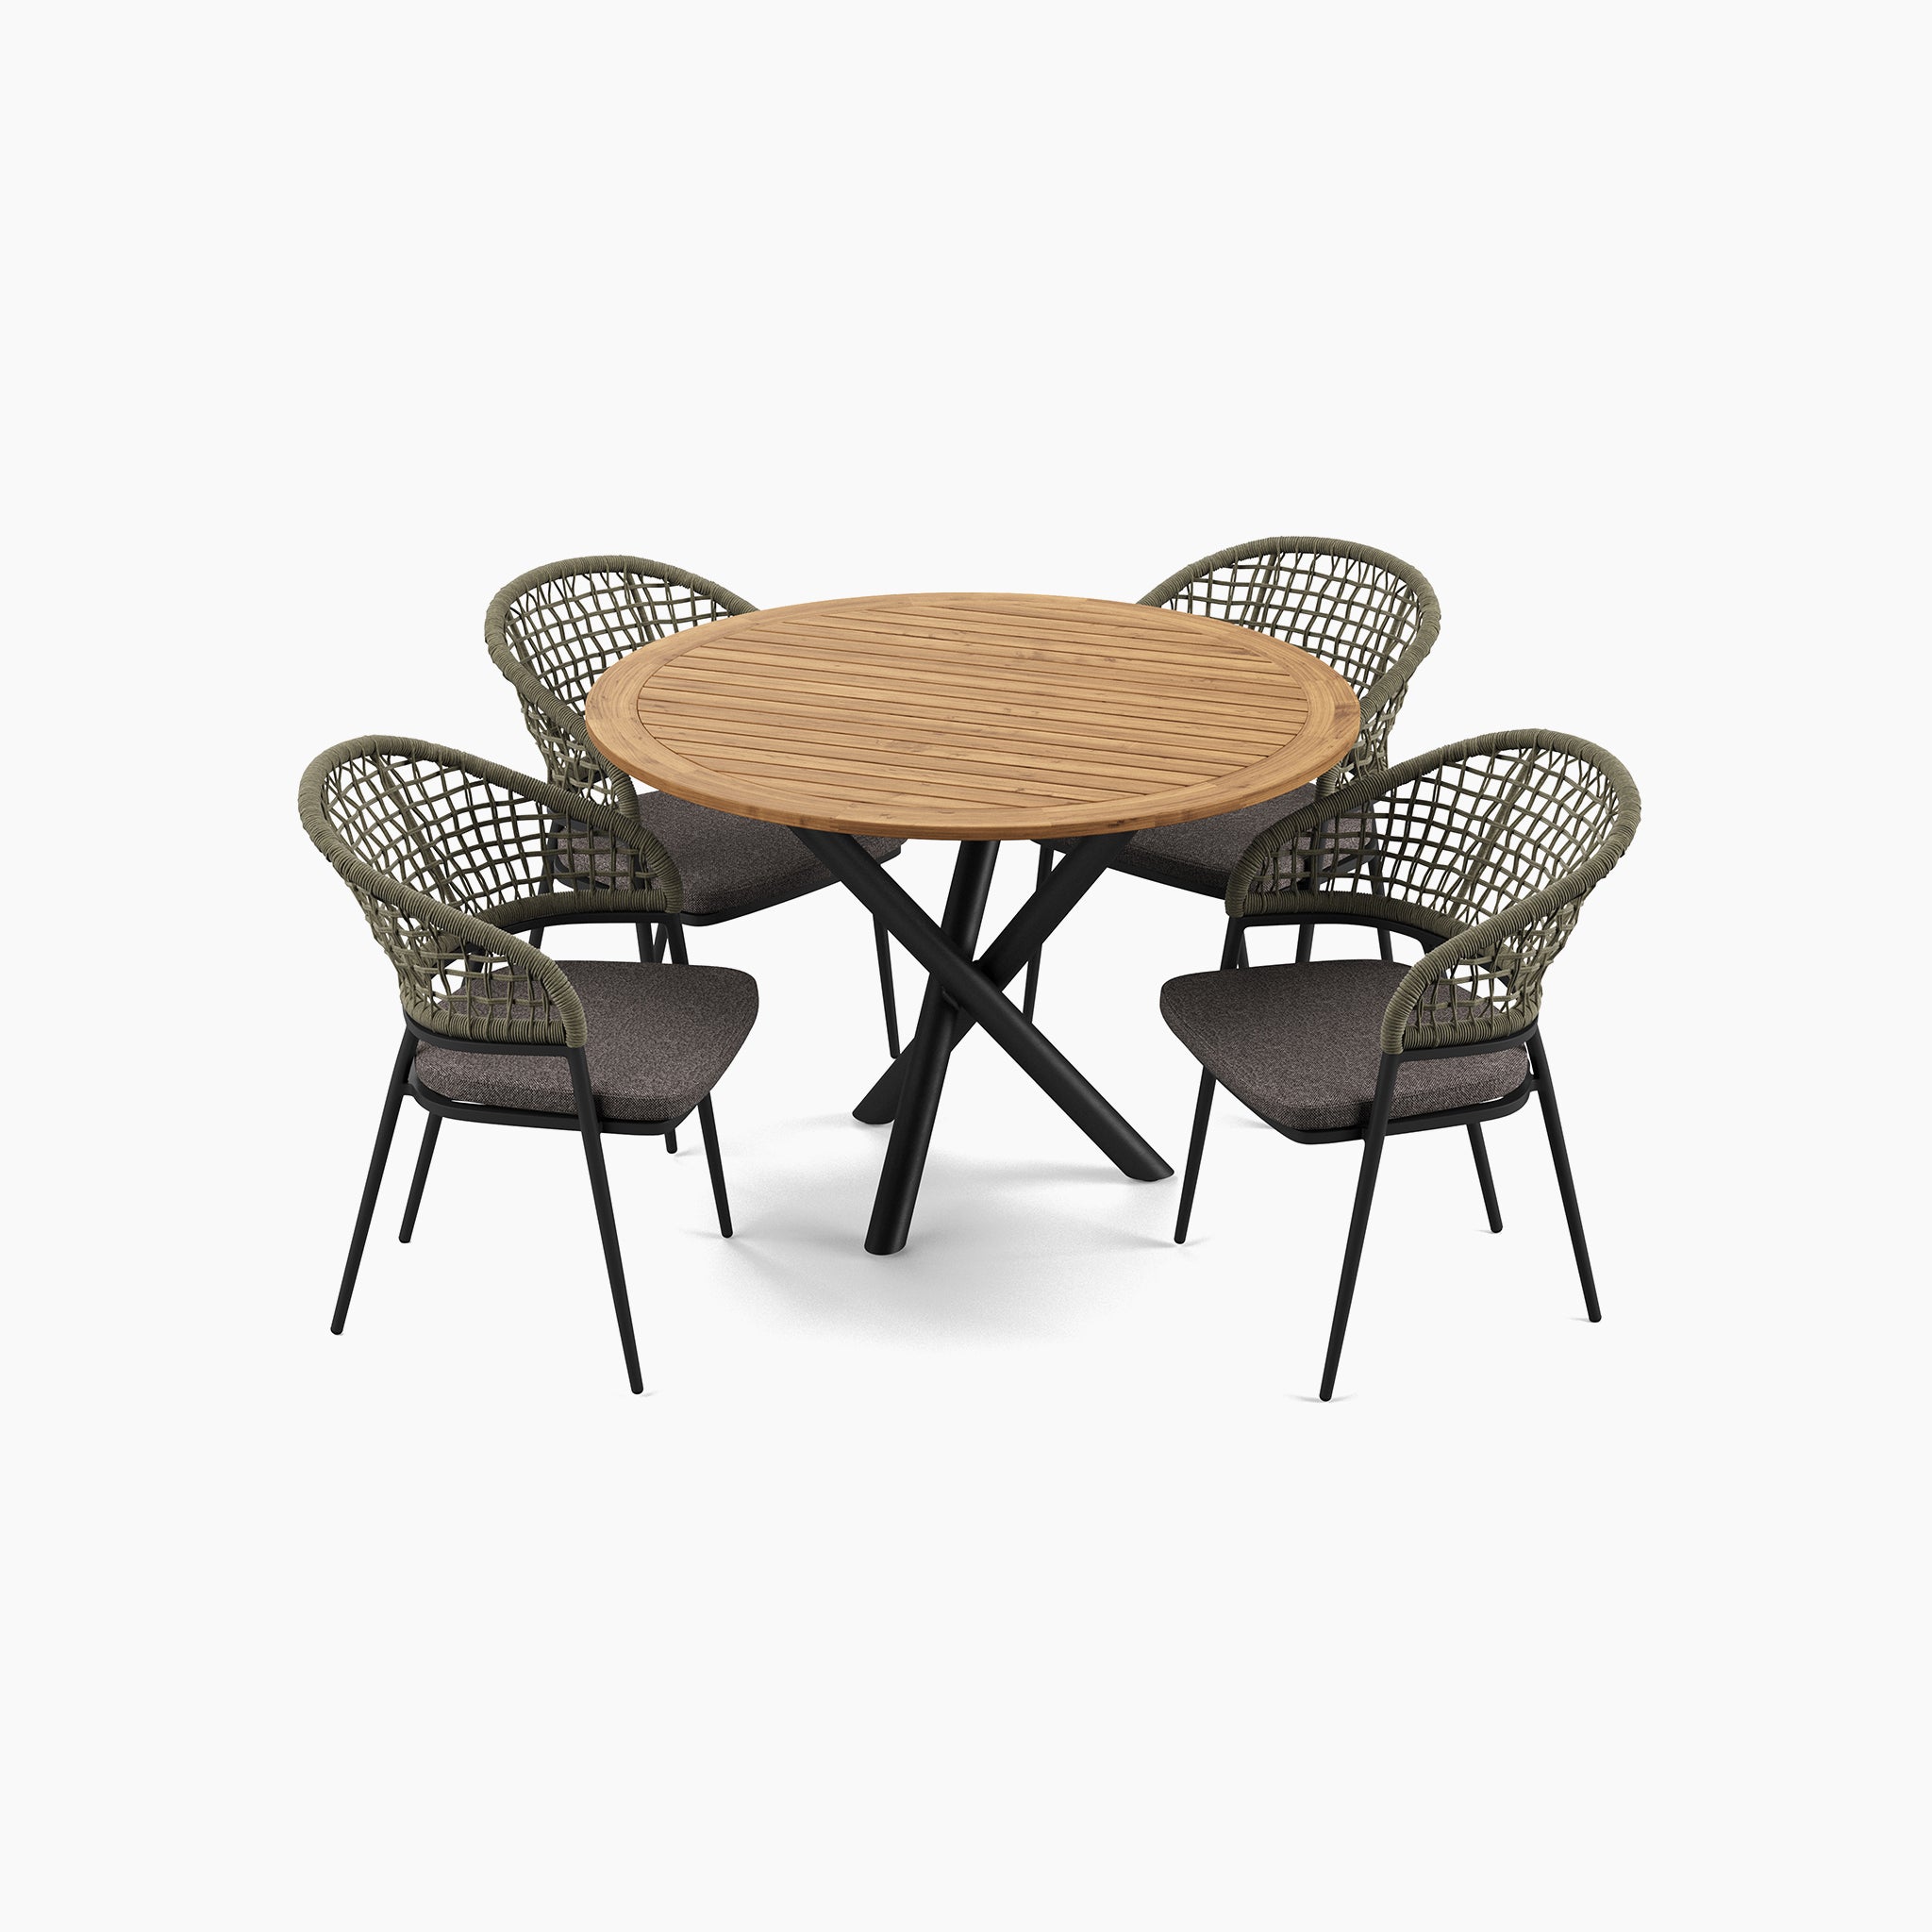 Kalama 4 Seat Round Dining Set with Teak Table in Olive Green